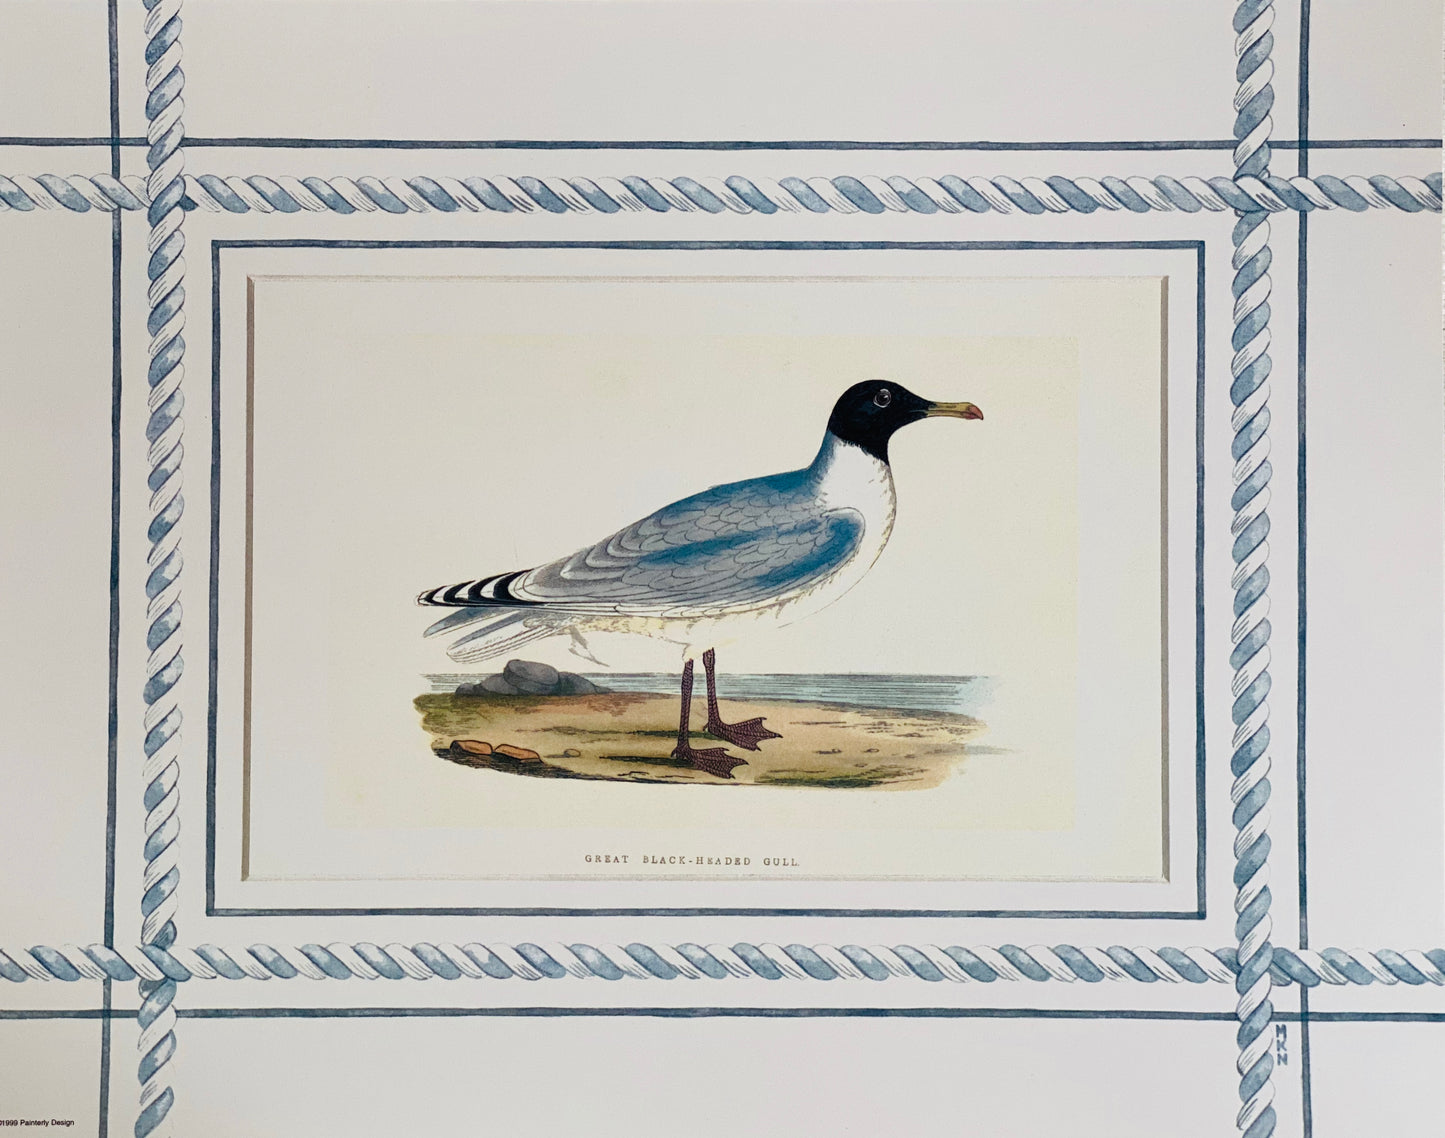 Set of 4 Seagull antique print with hand-painted border